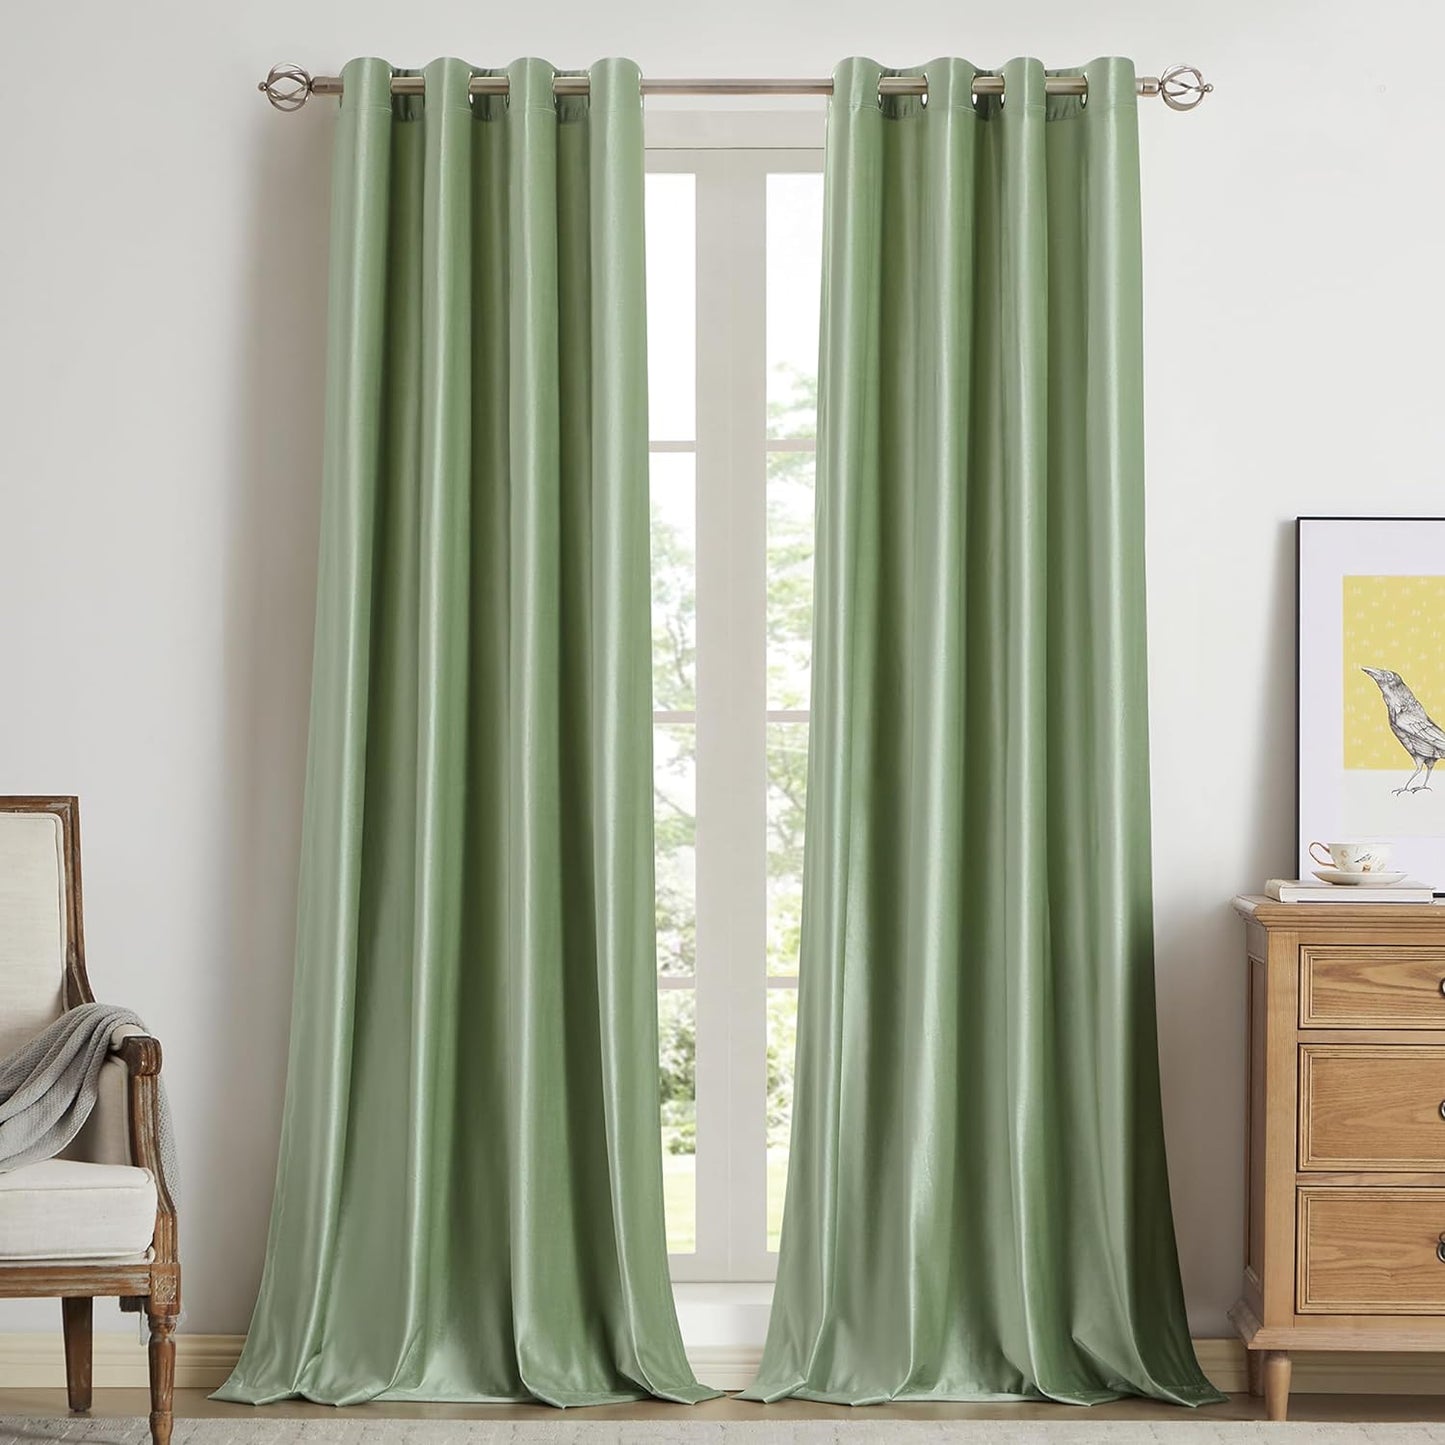 BULBUL Living Room Velvet Window Curtains 84 Inch Length- 2 Panels Hot Pink Blackout Window Drapes Curtains Thermal Insulated Room Darkening Decor Grommet Curtains for Bedroom  BULBUL Sage Green 52"W X 108"L 